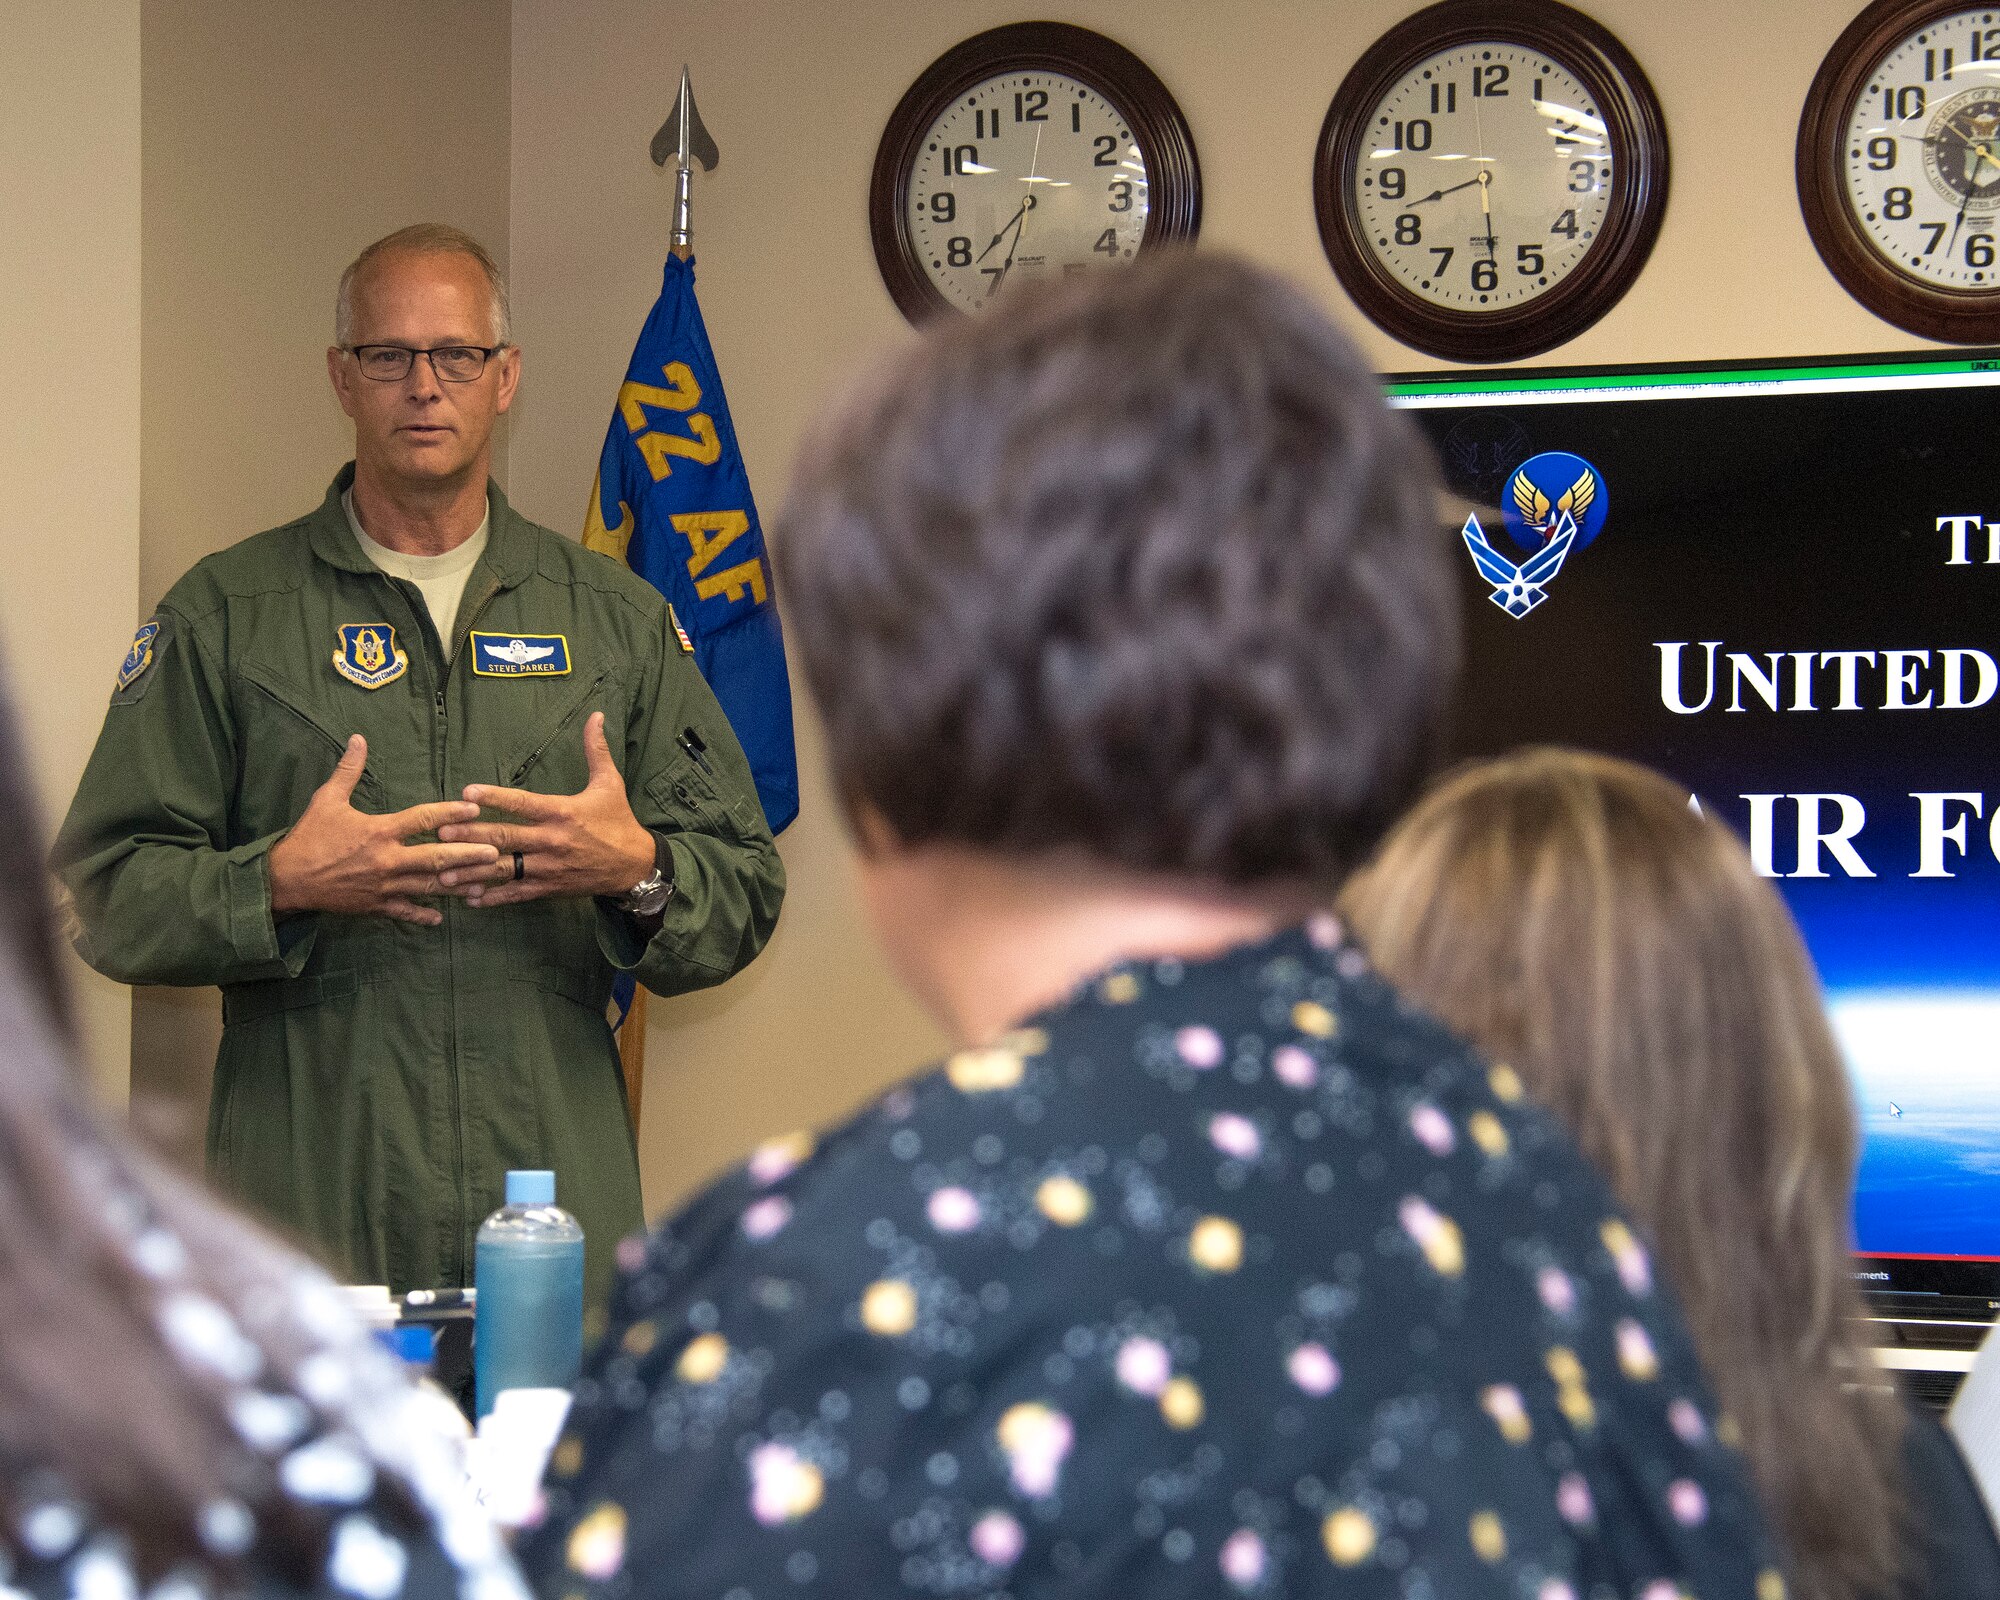 Brig. Gen. Steven Parker, 22nd Air Force vice commander, gives a briefing on the structure of the Air Force Reserve to key spouses from across 22nd Air Force at Dobbins Air Reserve Base, Georgia, April 3, 2019.